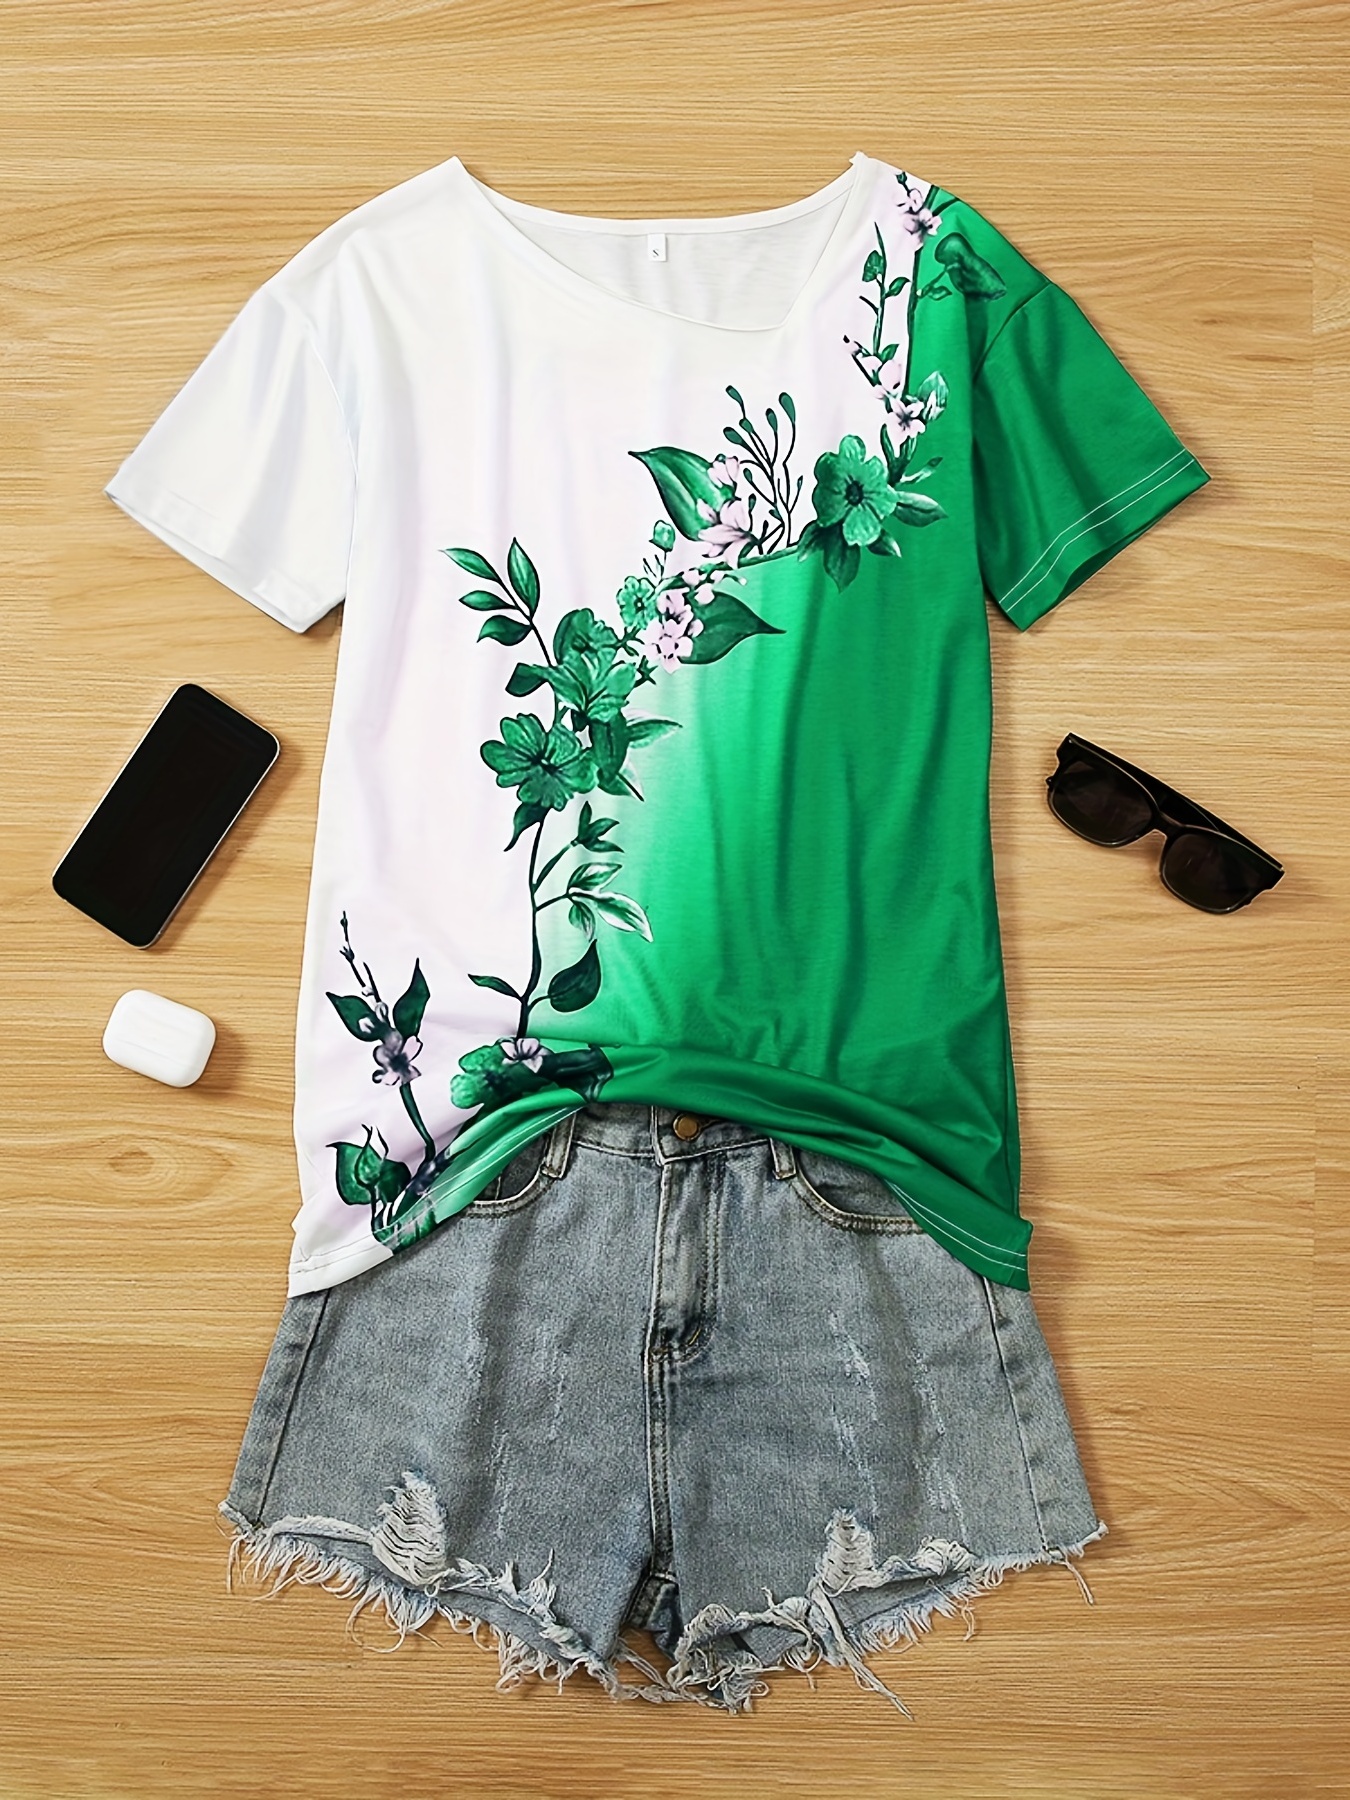 Flower Floral New Style Women Fashion Female Short Sleeve Ladies T